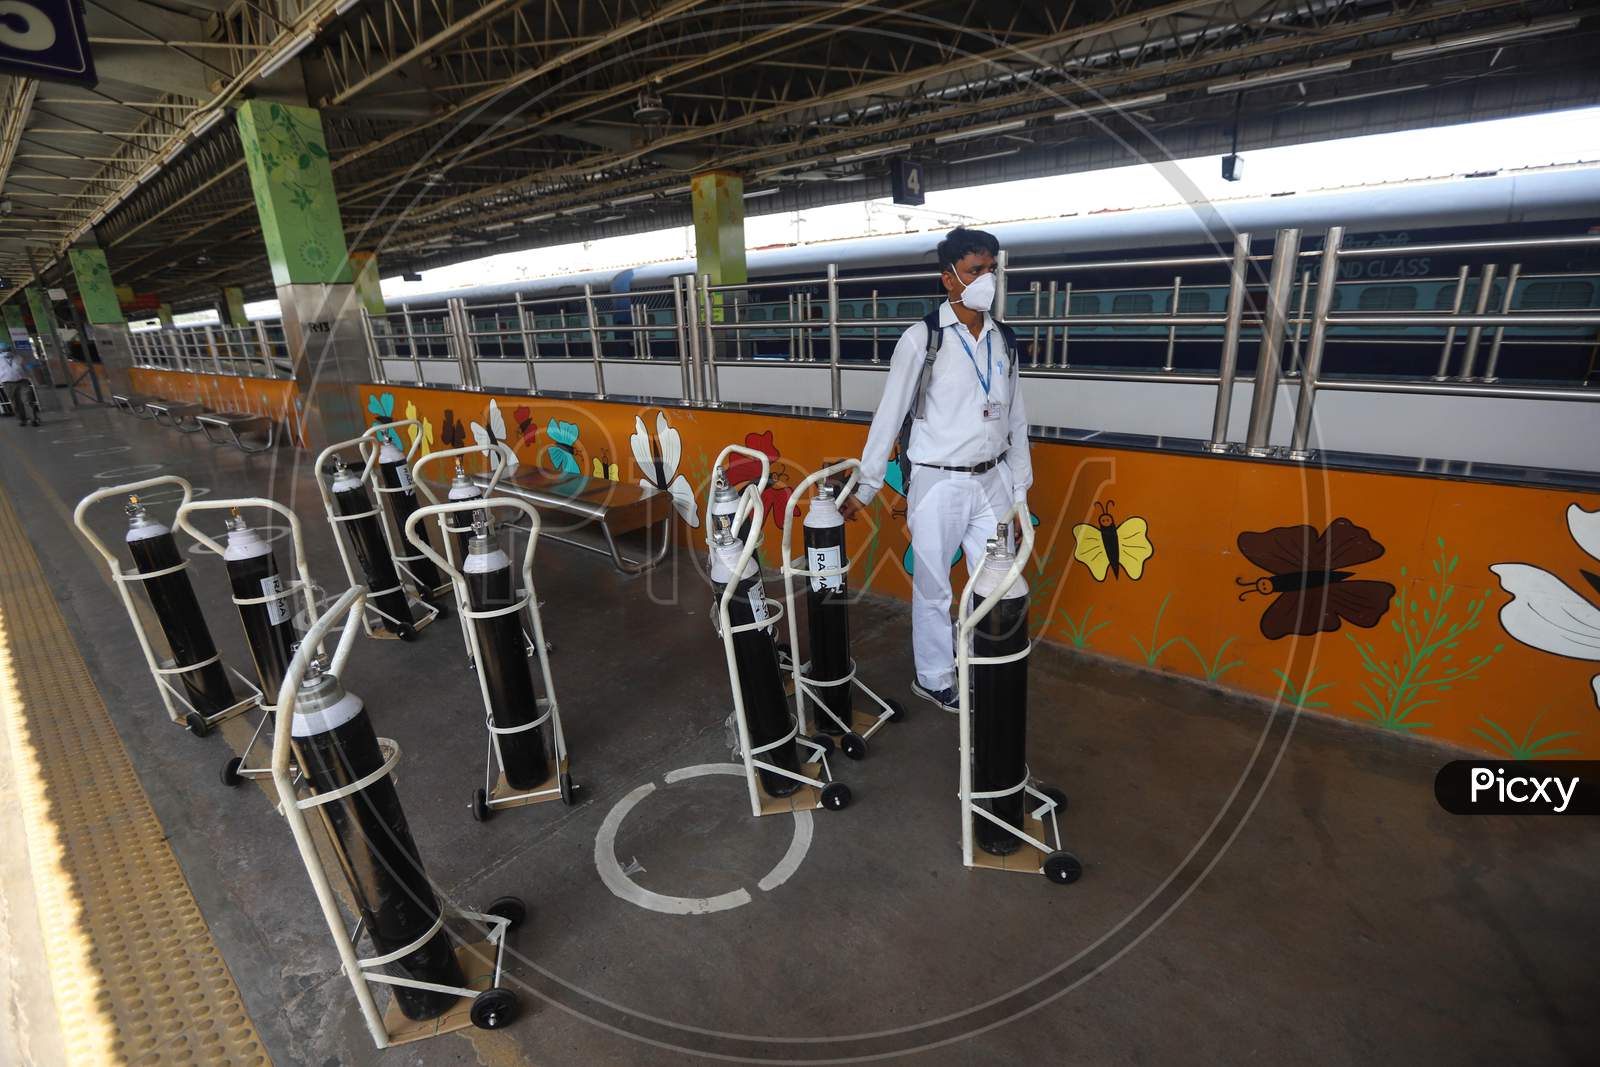 Workers Carry Oxygen Cylinders Inside Anand Vihar Railway Station, Where Train Coaches Are Being Temporarily Converted Into Covid-19 Isolation Facilities, In New Delhi, India On June 17, 2020.